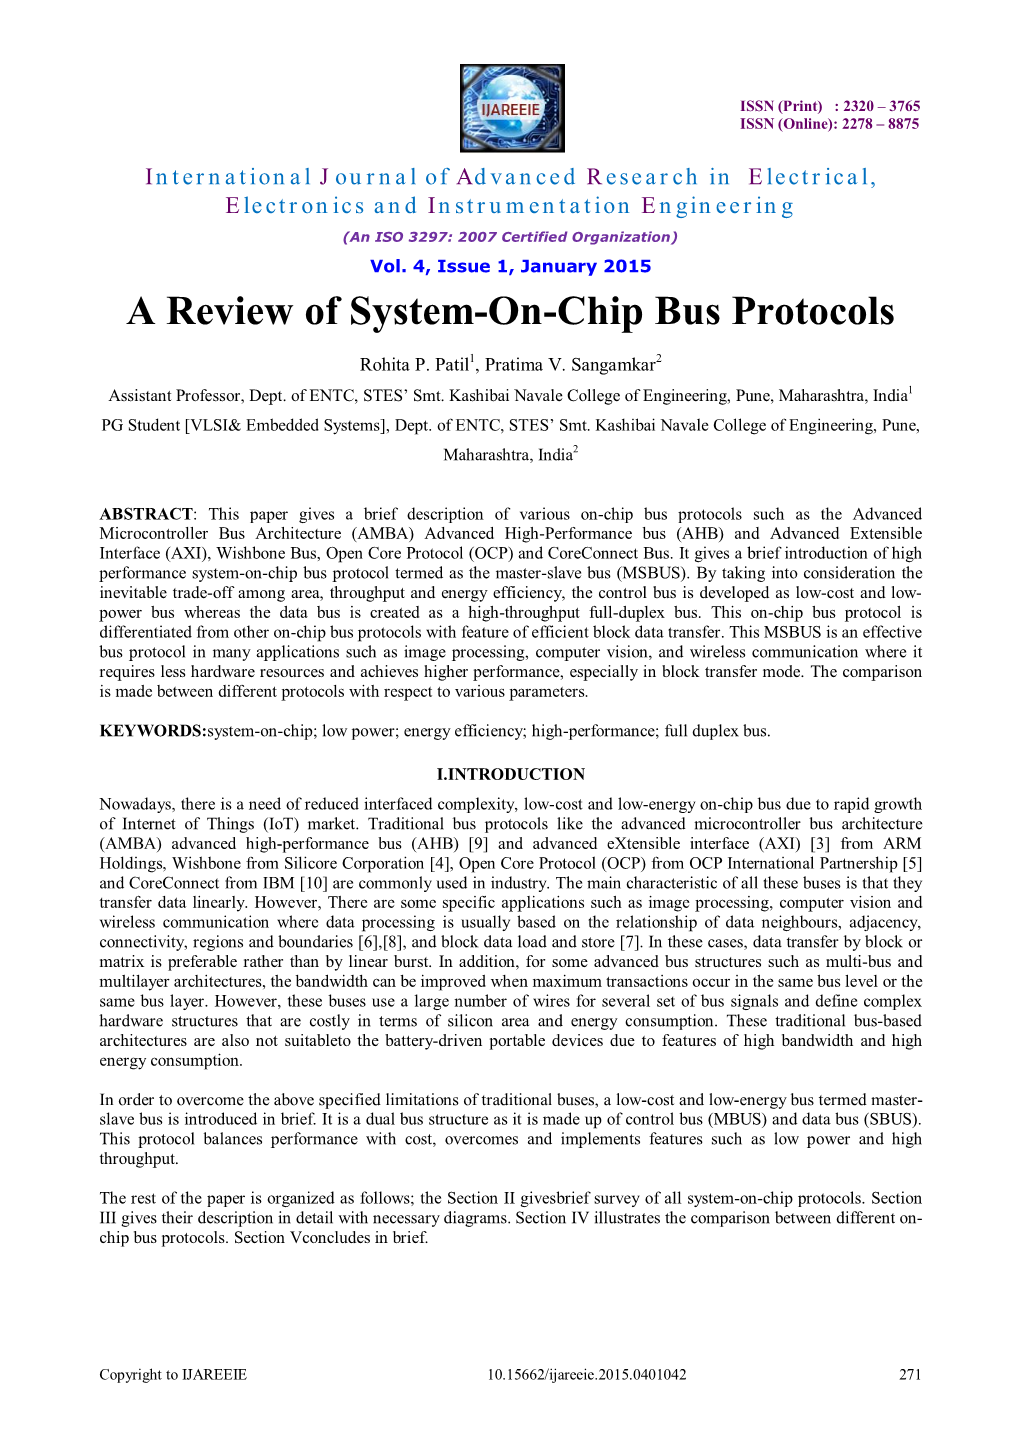 A Review of System-On-Chip Bus Protocols